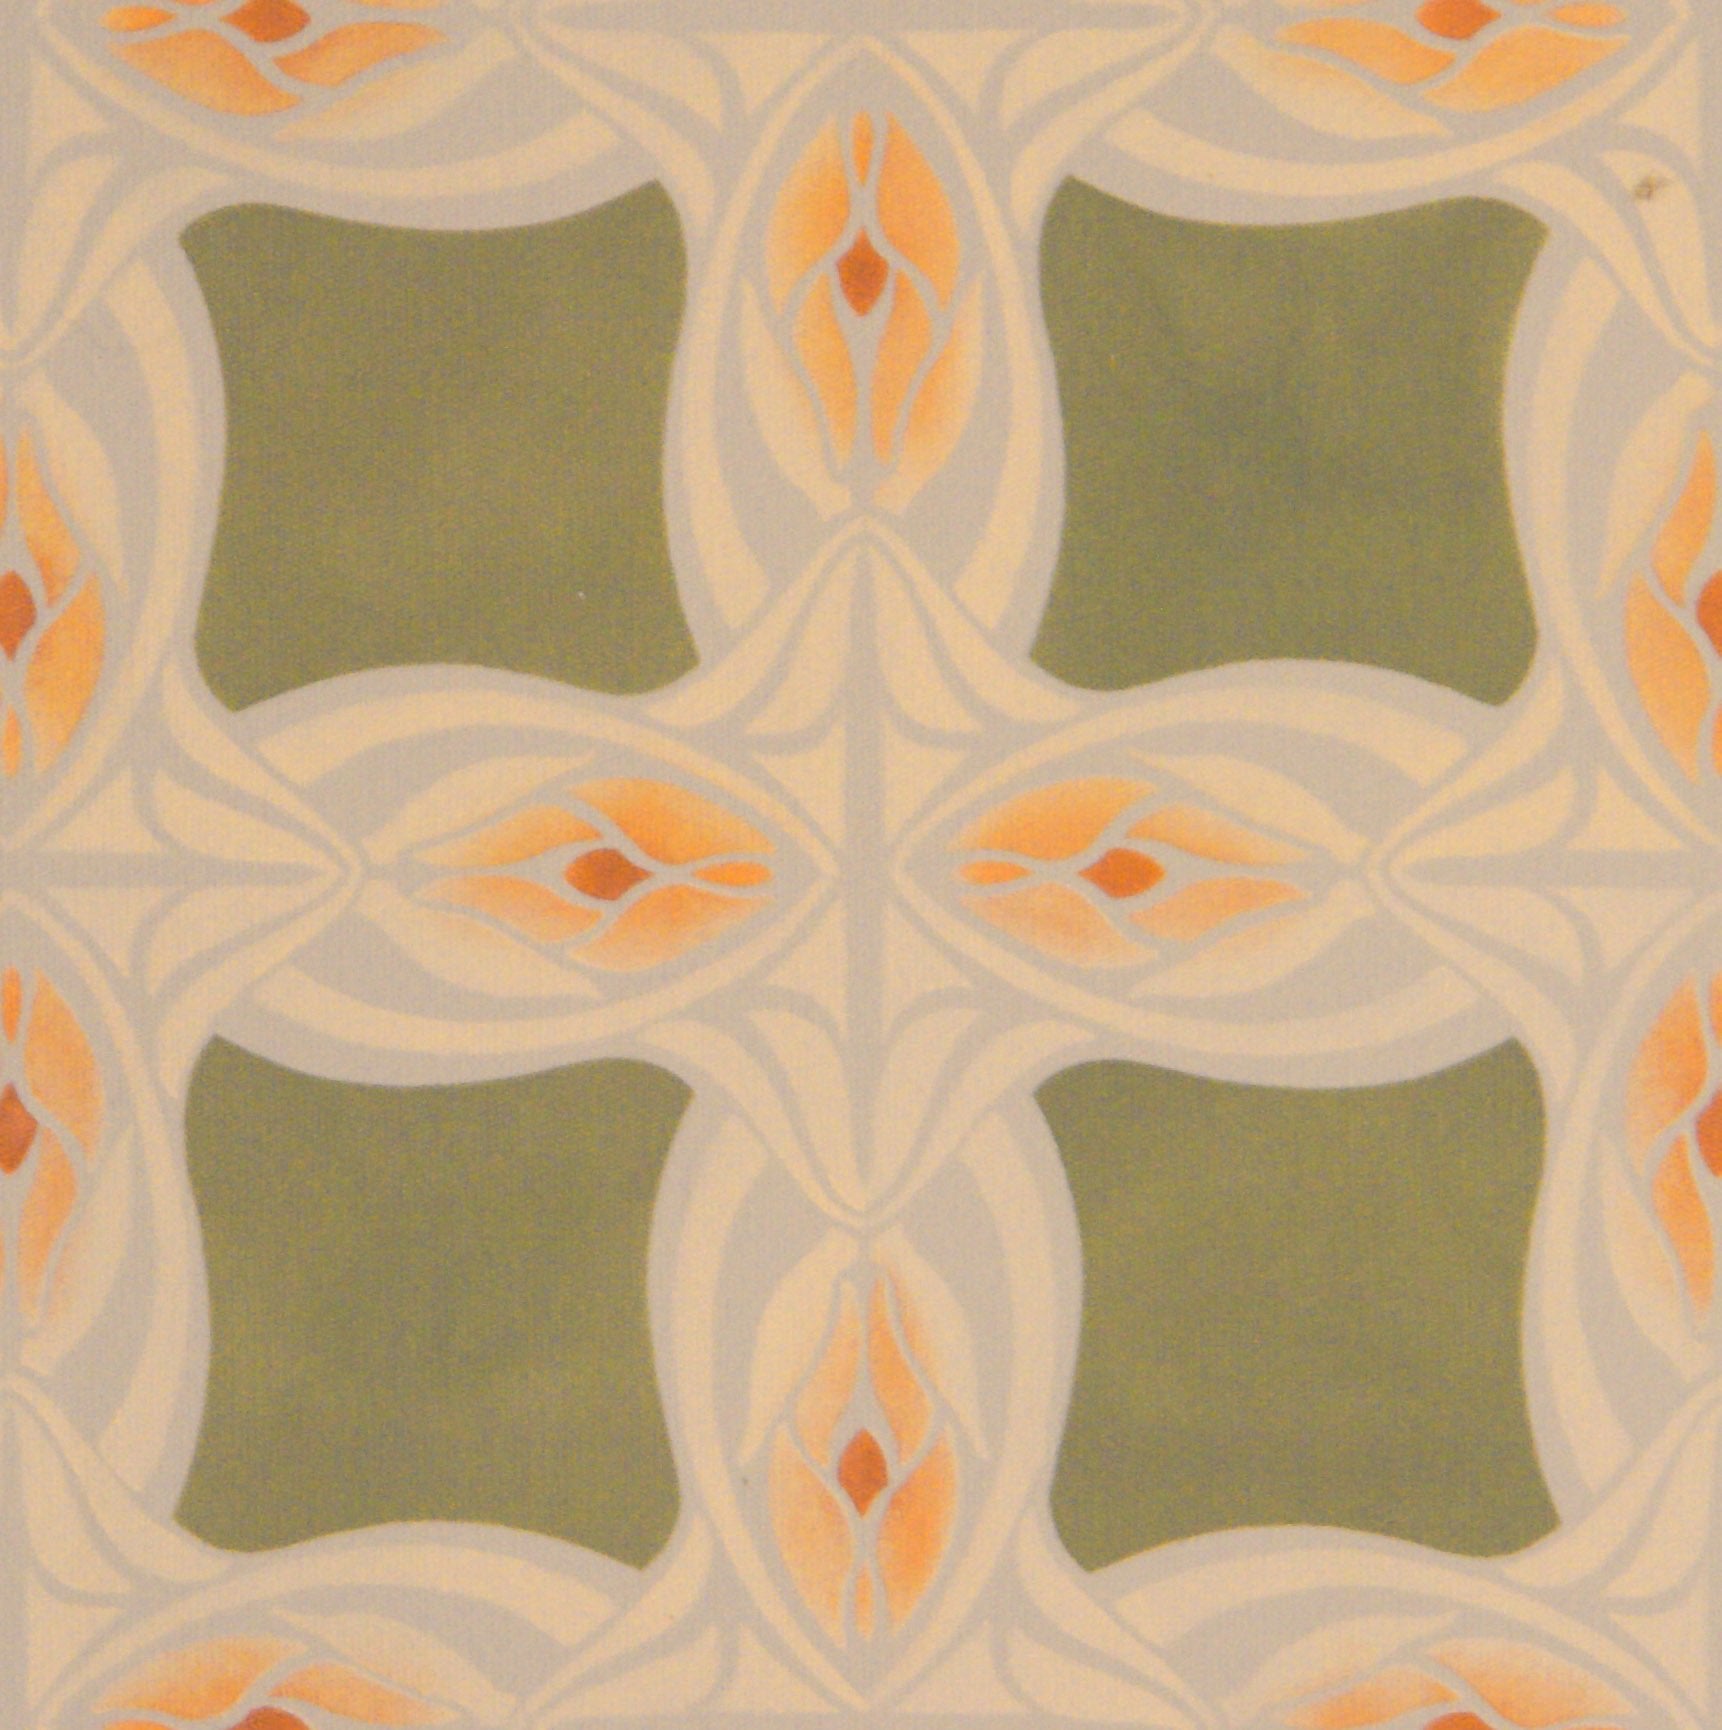 A close up of the center pattern of Wunderlich Floorcloth #1.